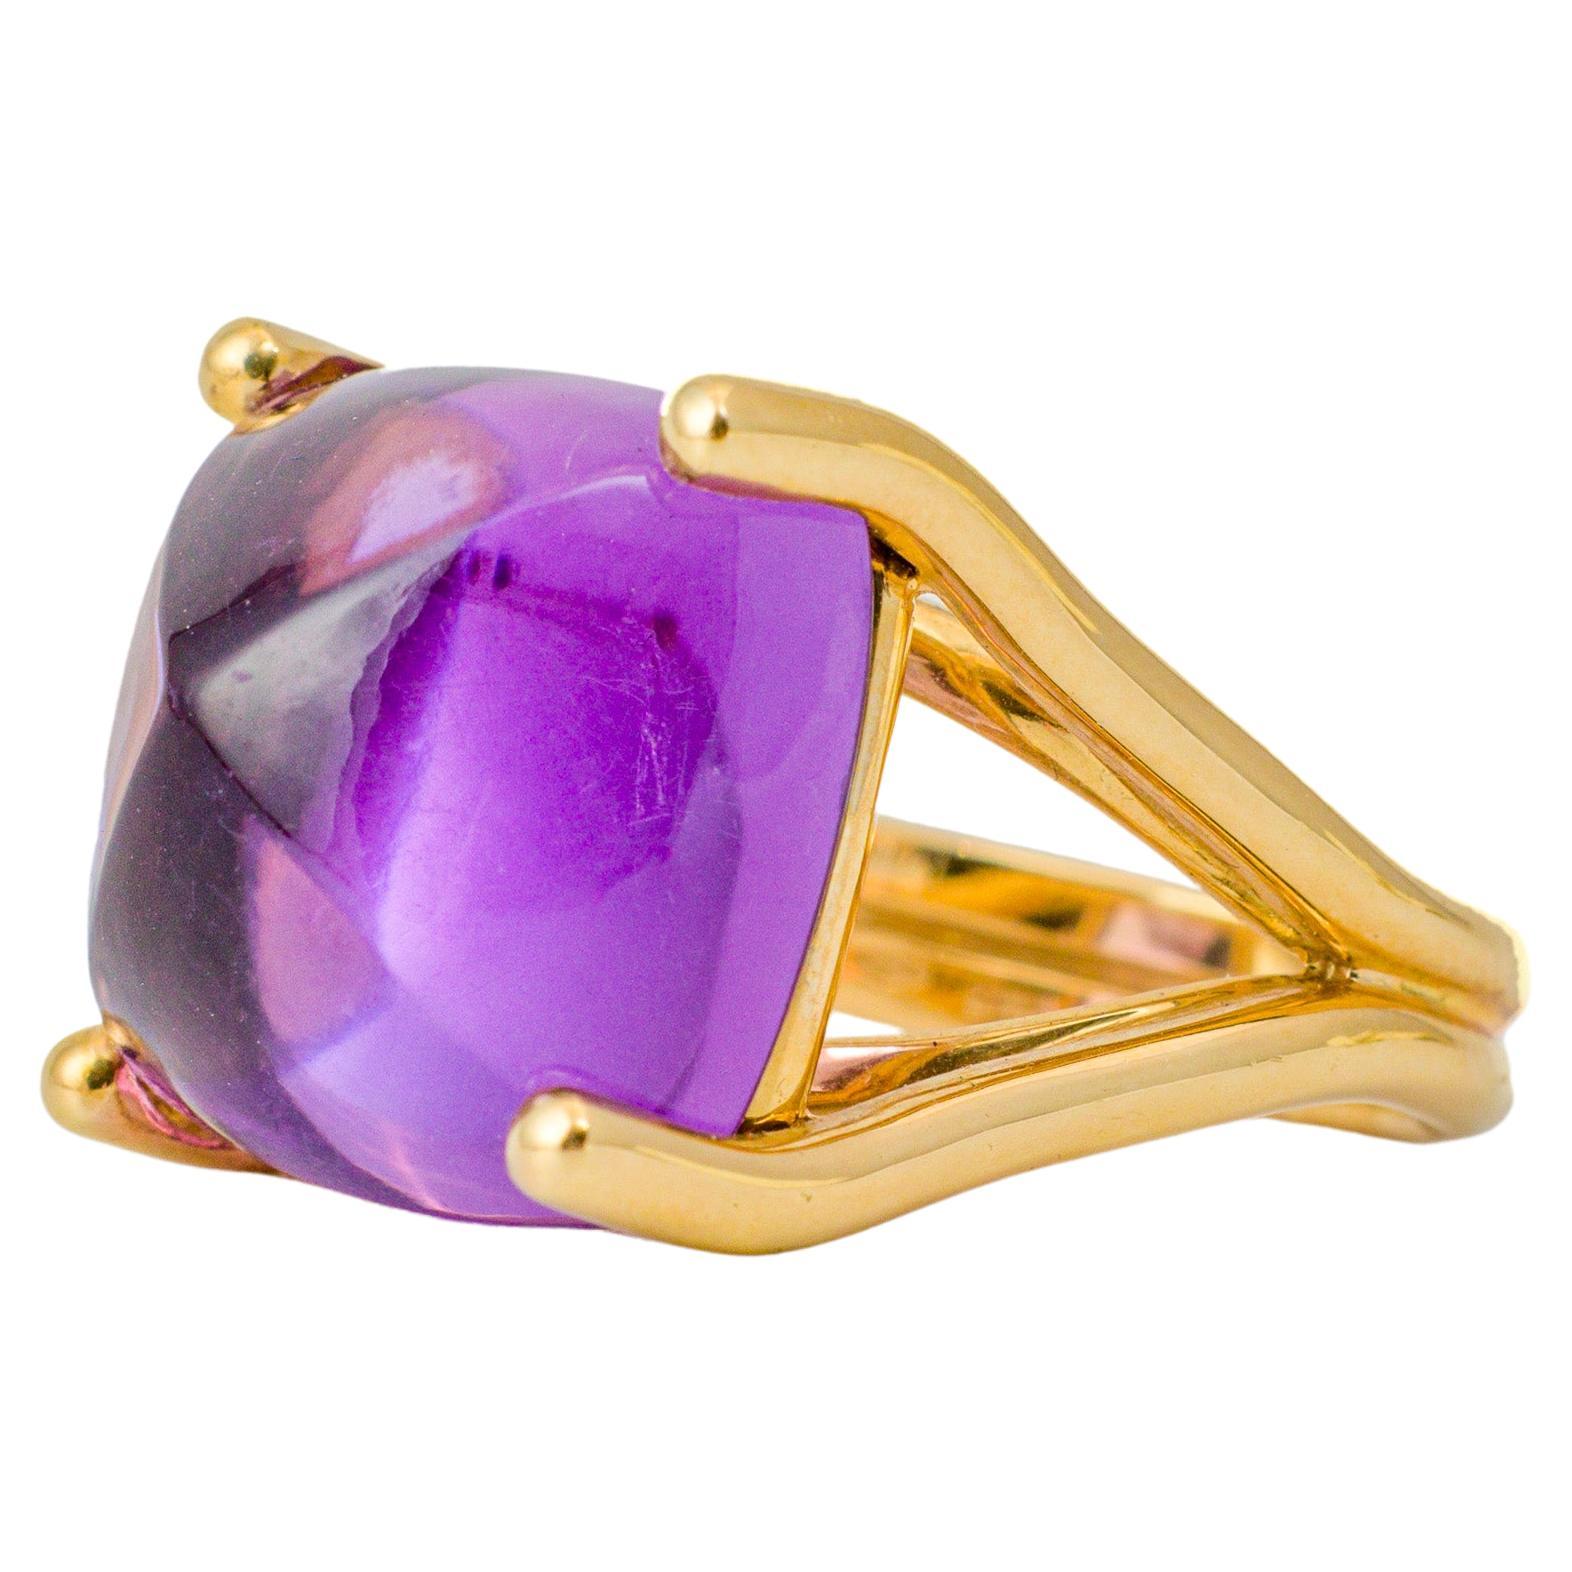 "Costis" Stone on Wire Ring with 27.61 carats Sugarloaf Cabochon Amethyst For Sale